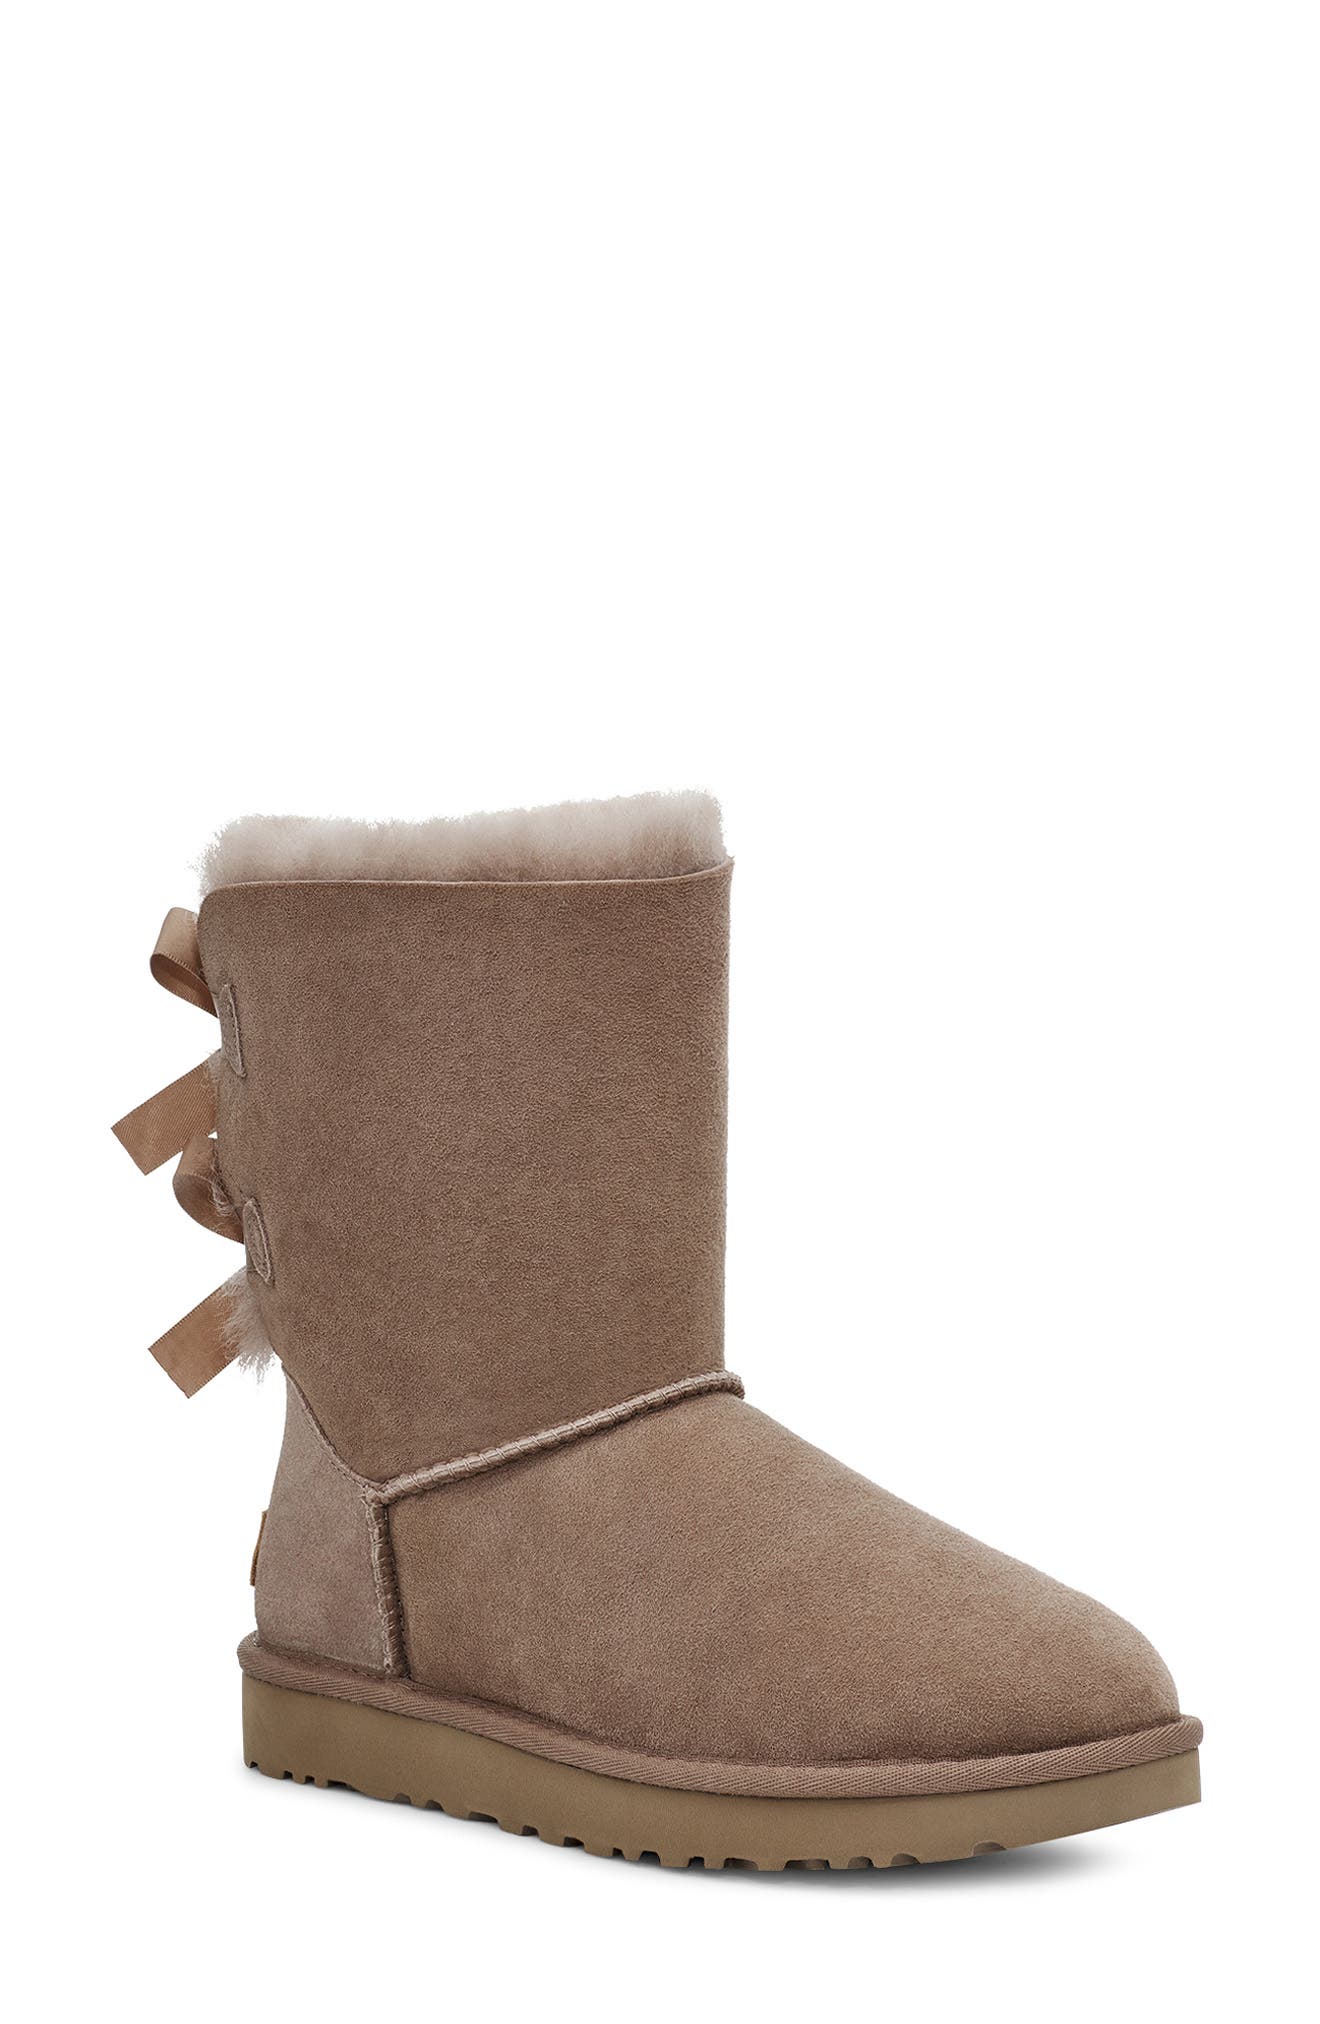 Women's UGG® Comfortable Shoes | Nordstrom